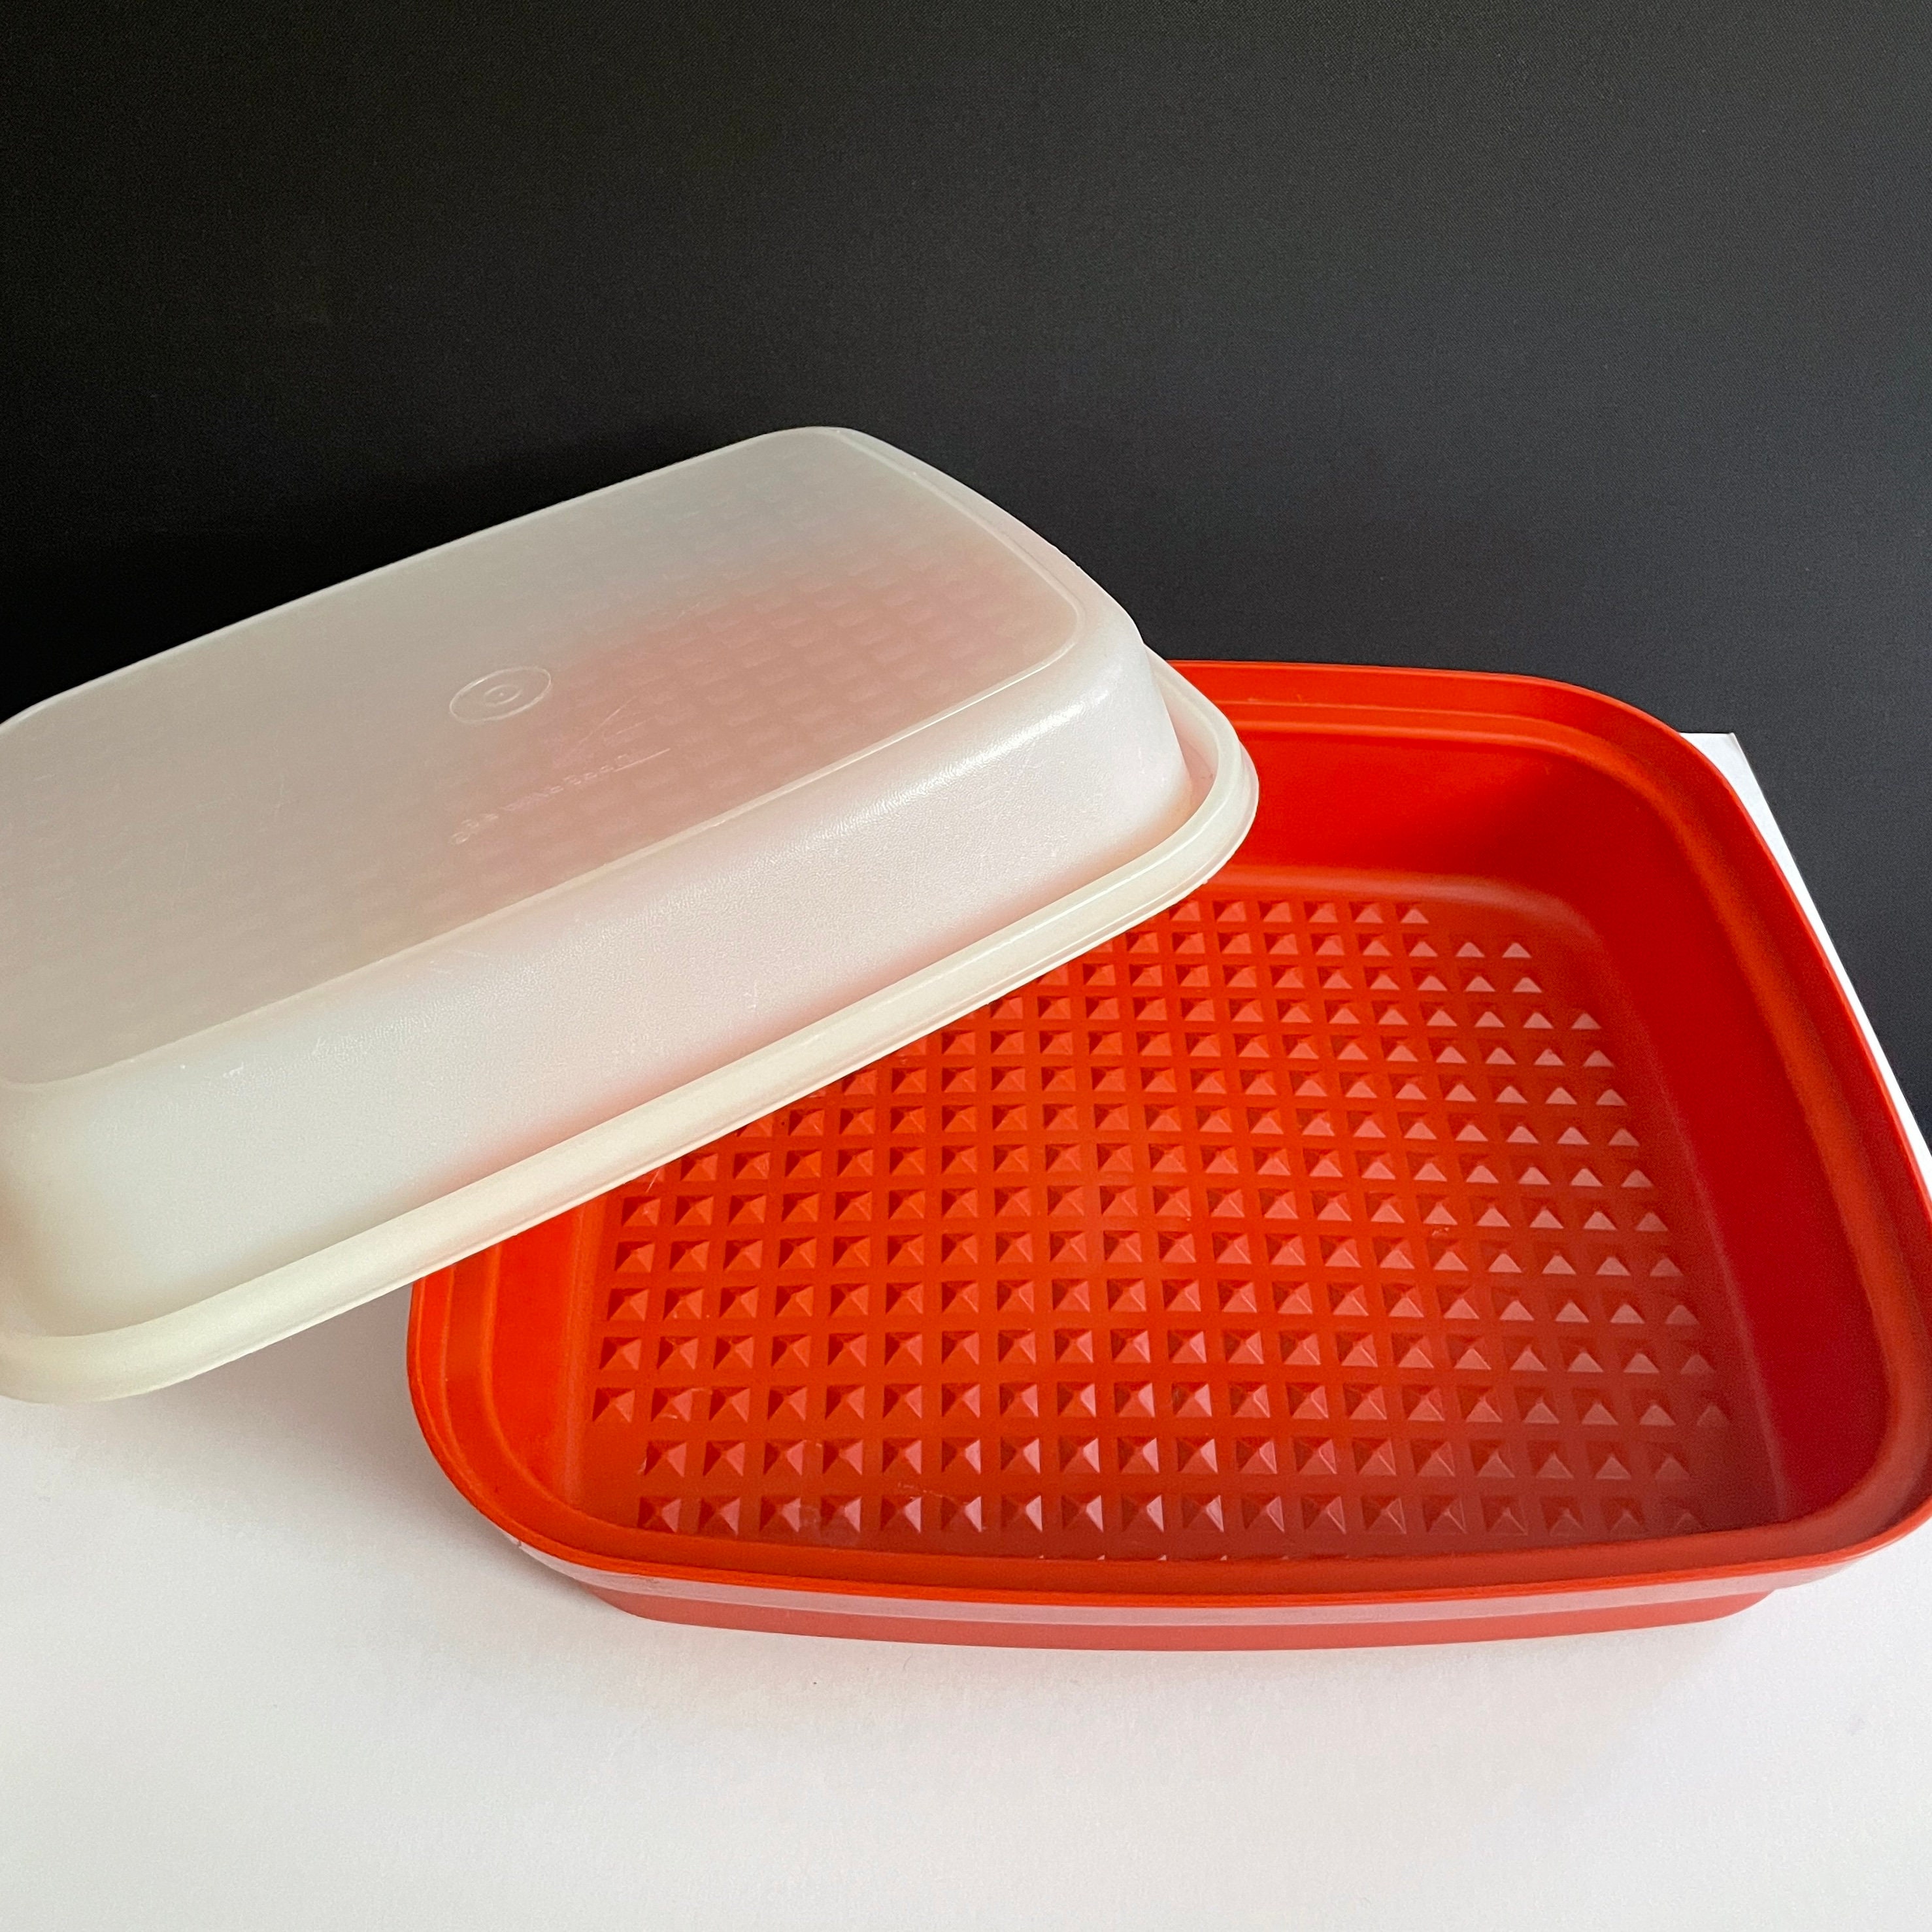 Large Orange Tupperware Marinade Container Meat Keeper 